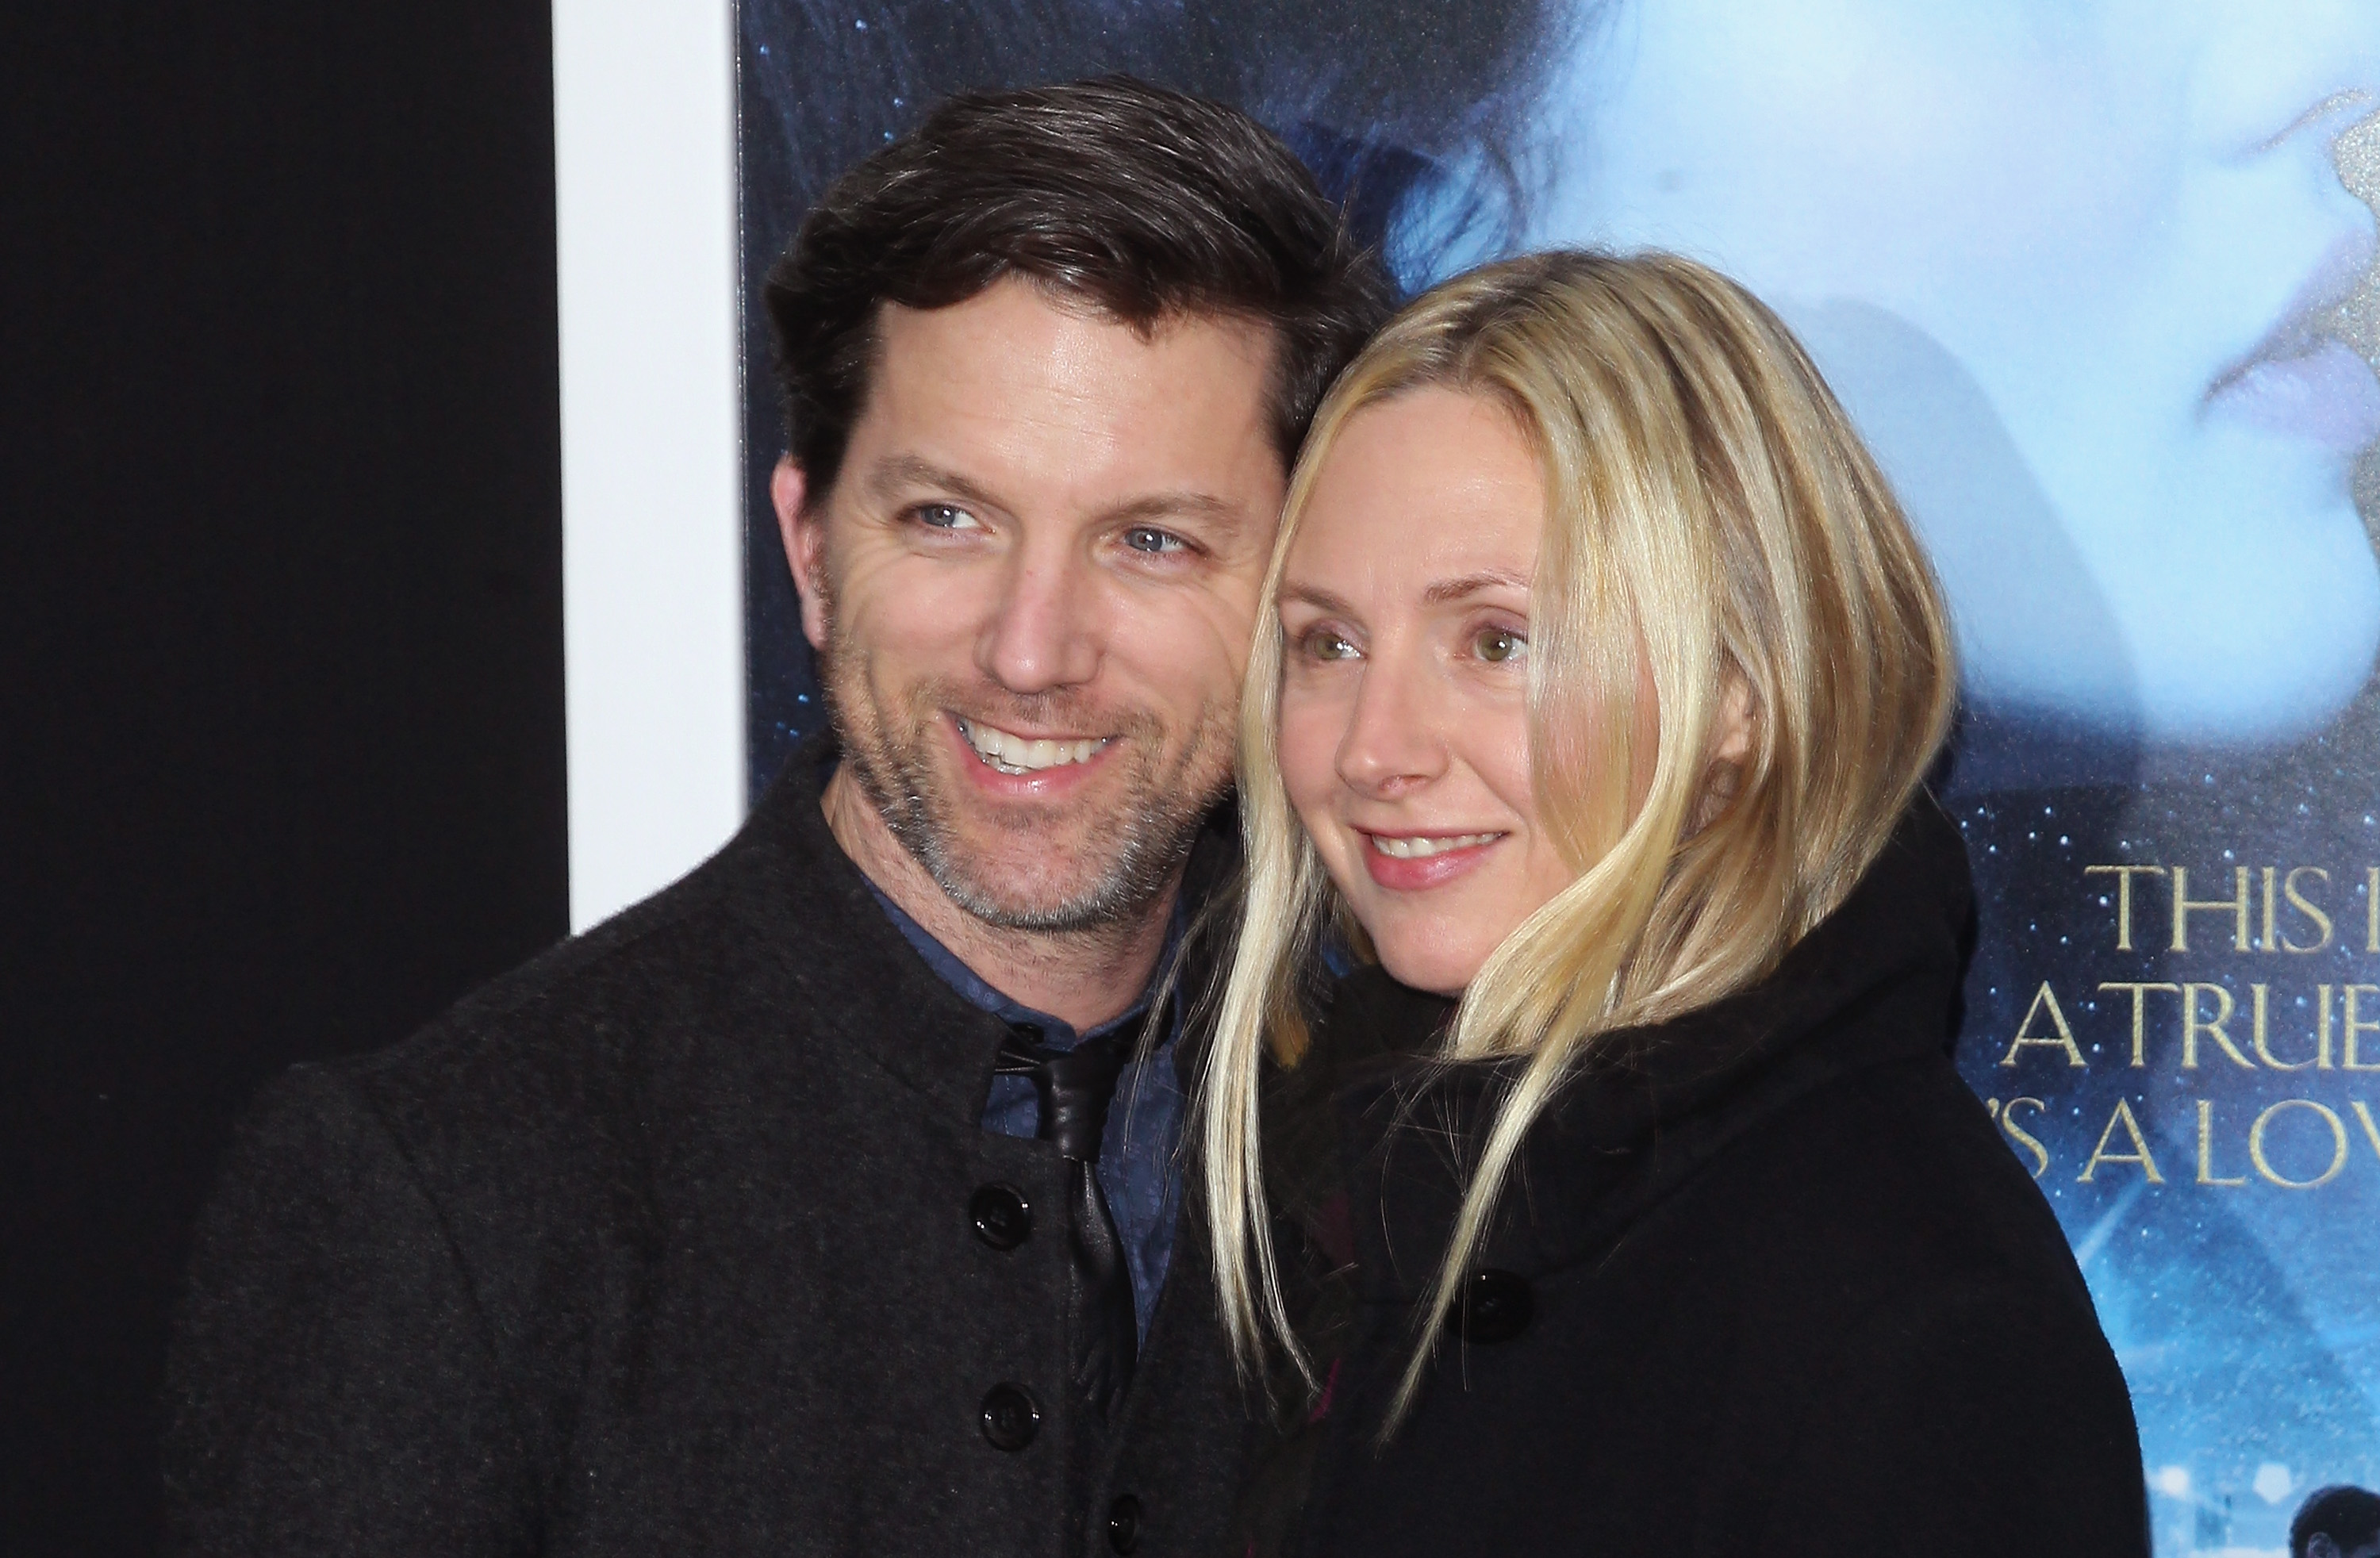 Jon Patrick Walker and Hope Davis at the world premiere of "Winter's Tale" on February 11, 2014, in New York | Source: Getty Images